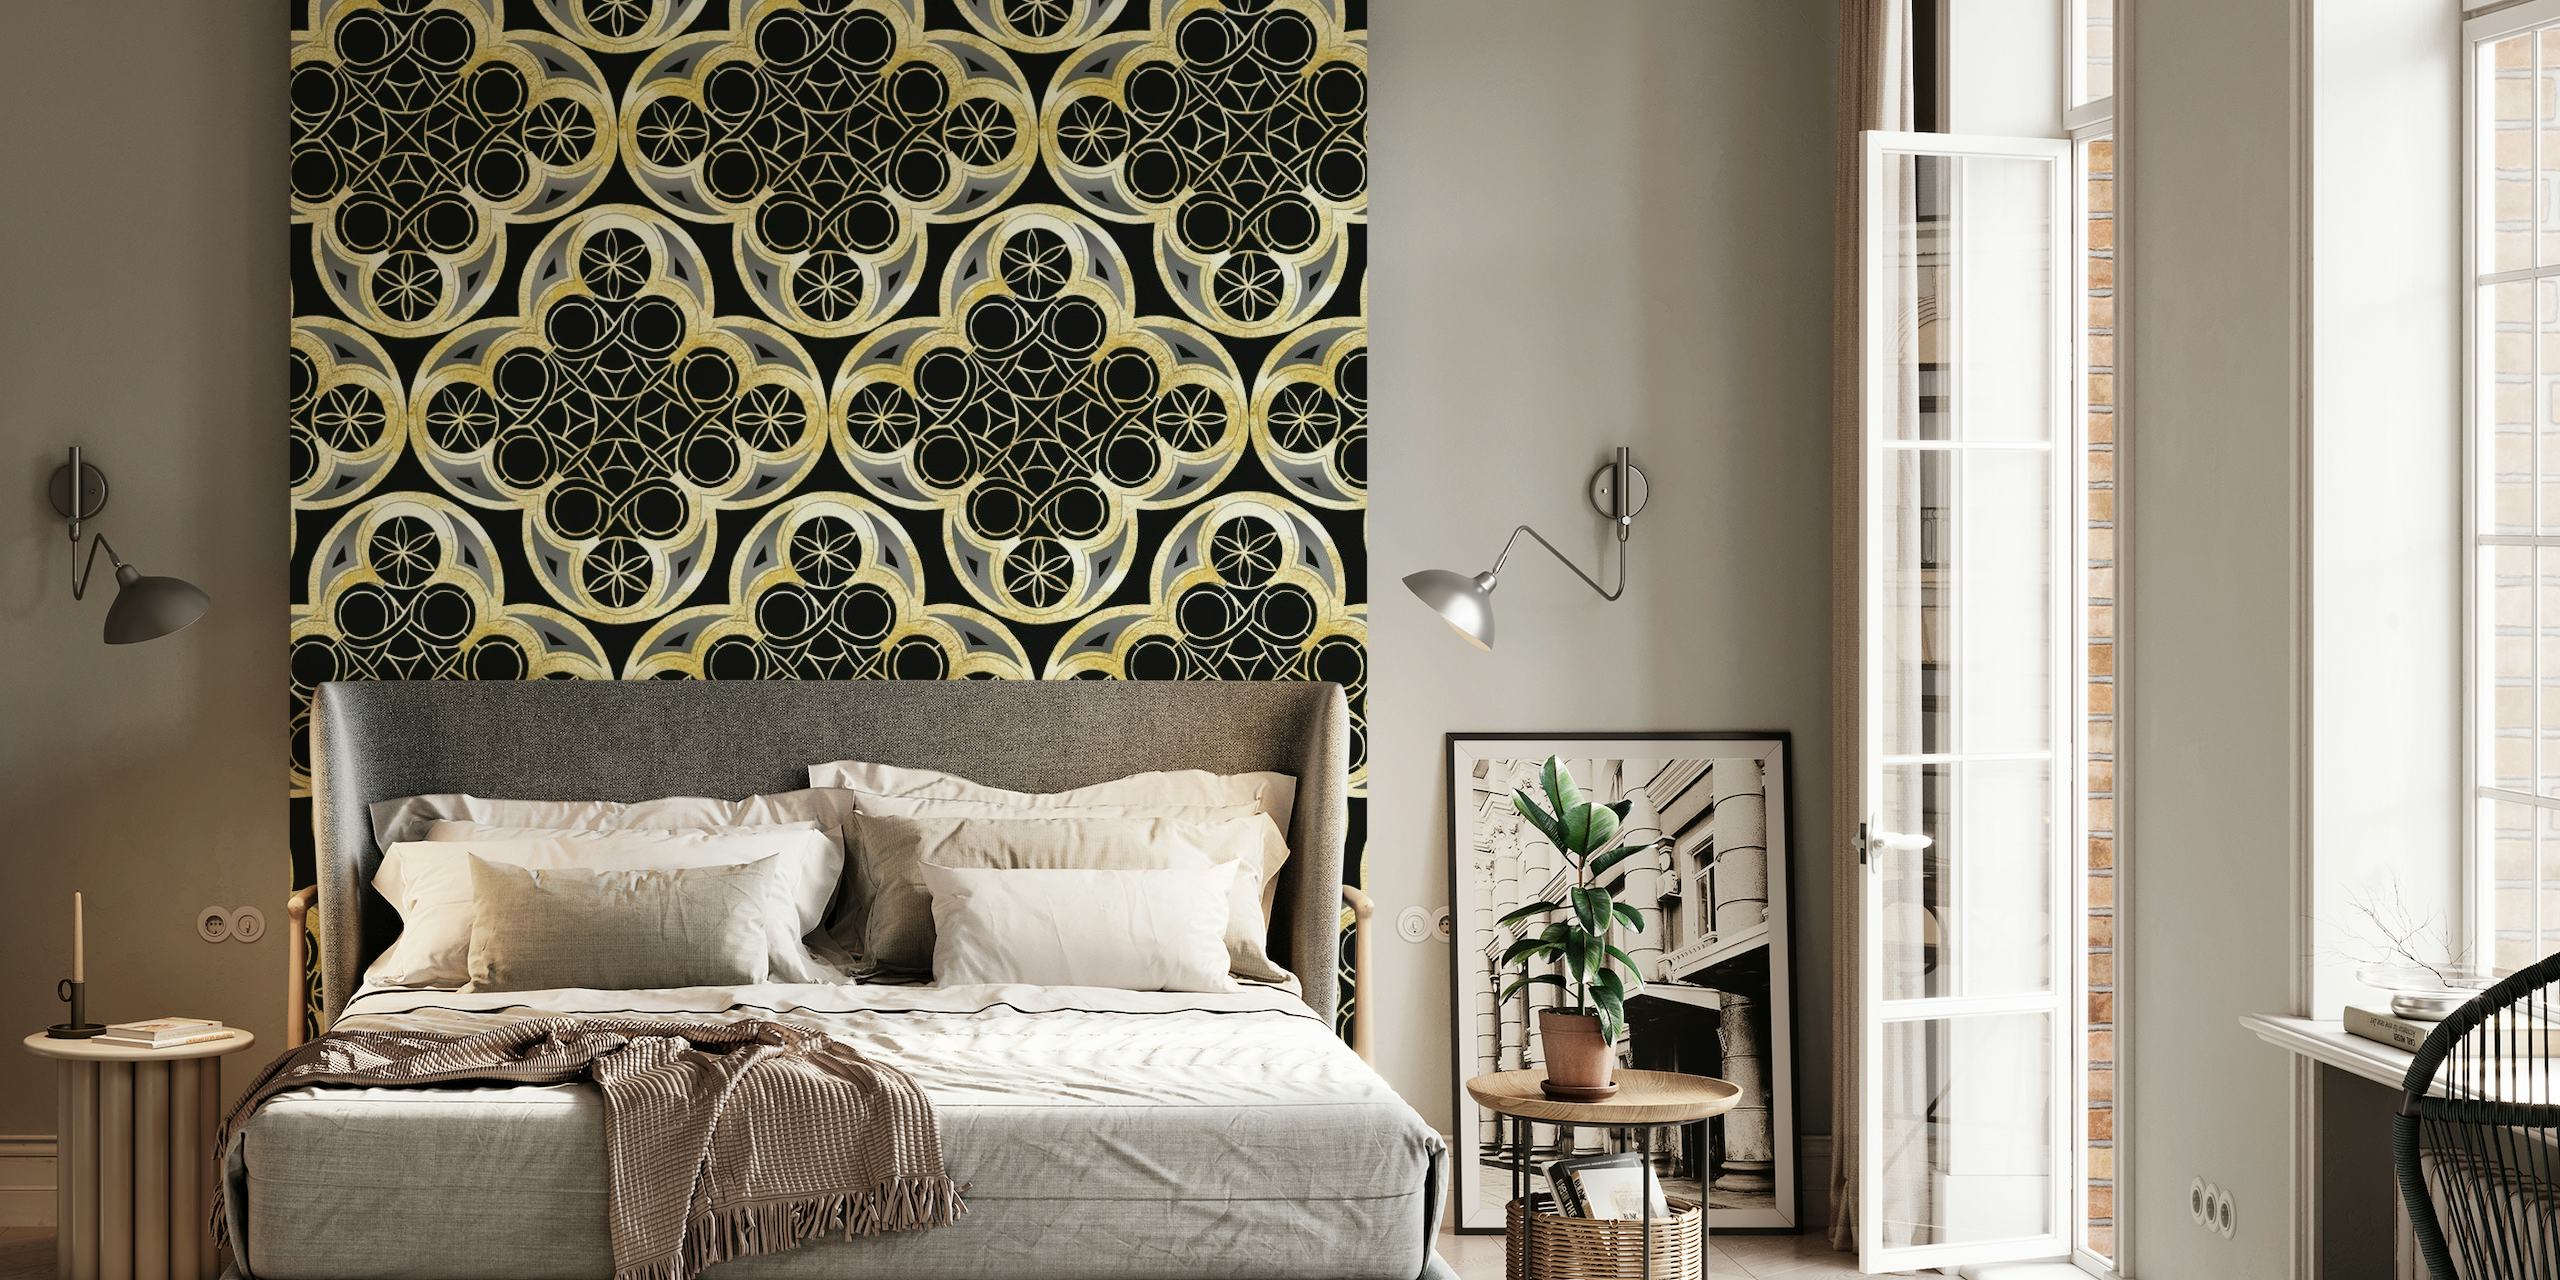 Elegant Moroccan tile pattern wall mural in gold and black